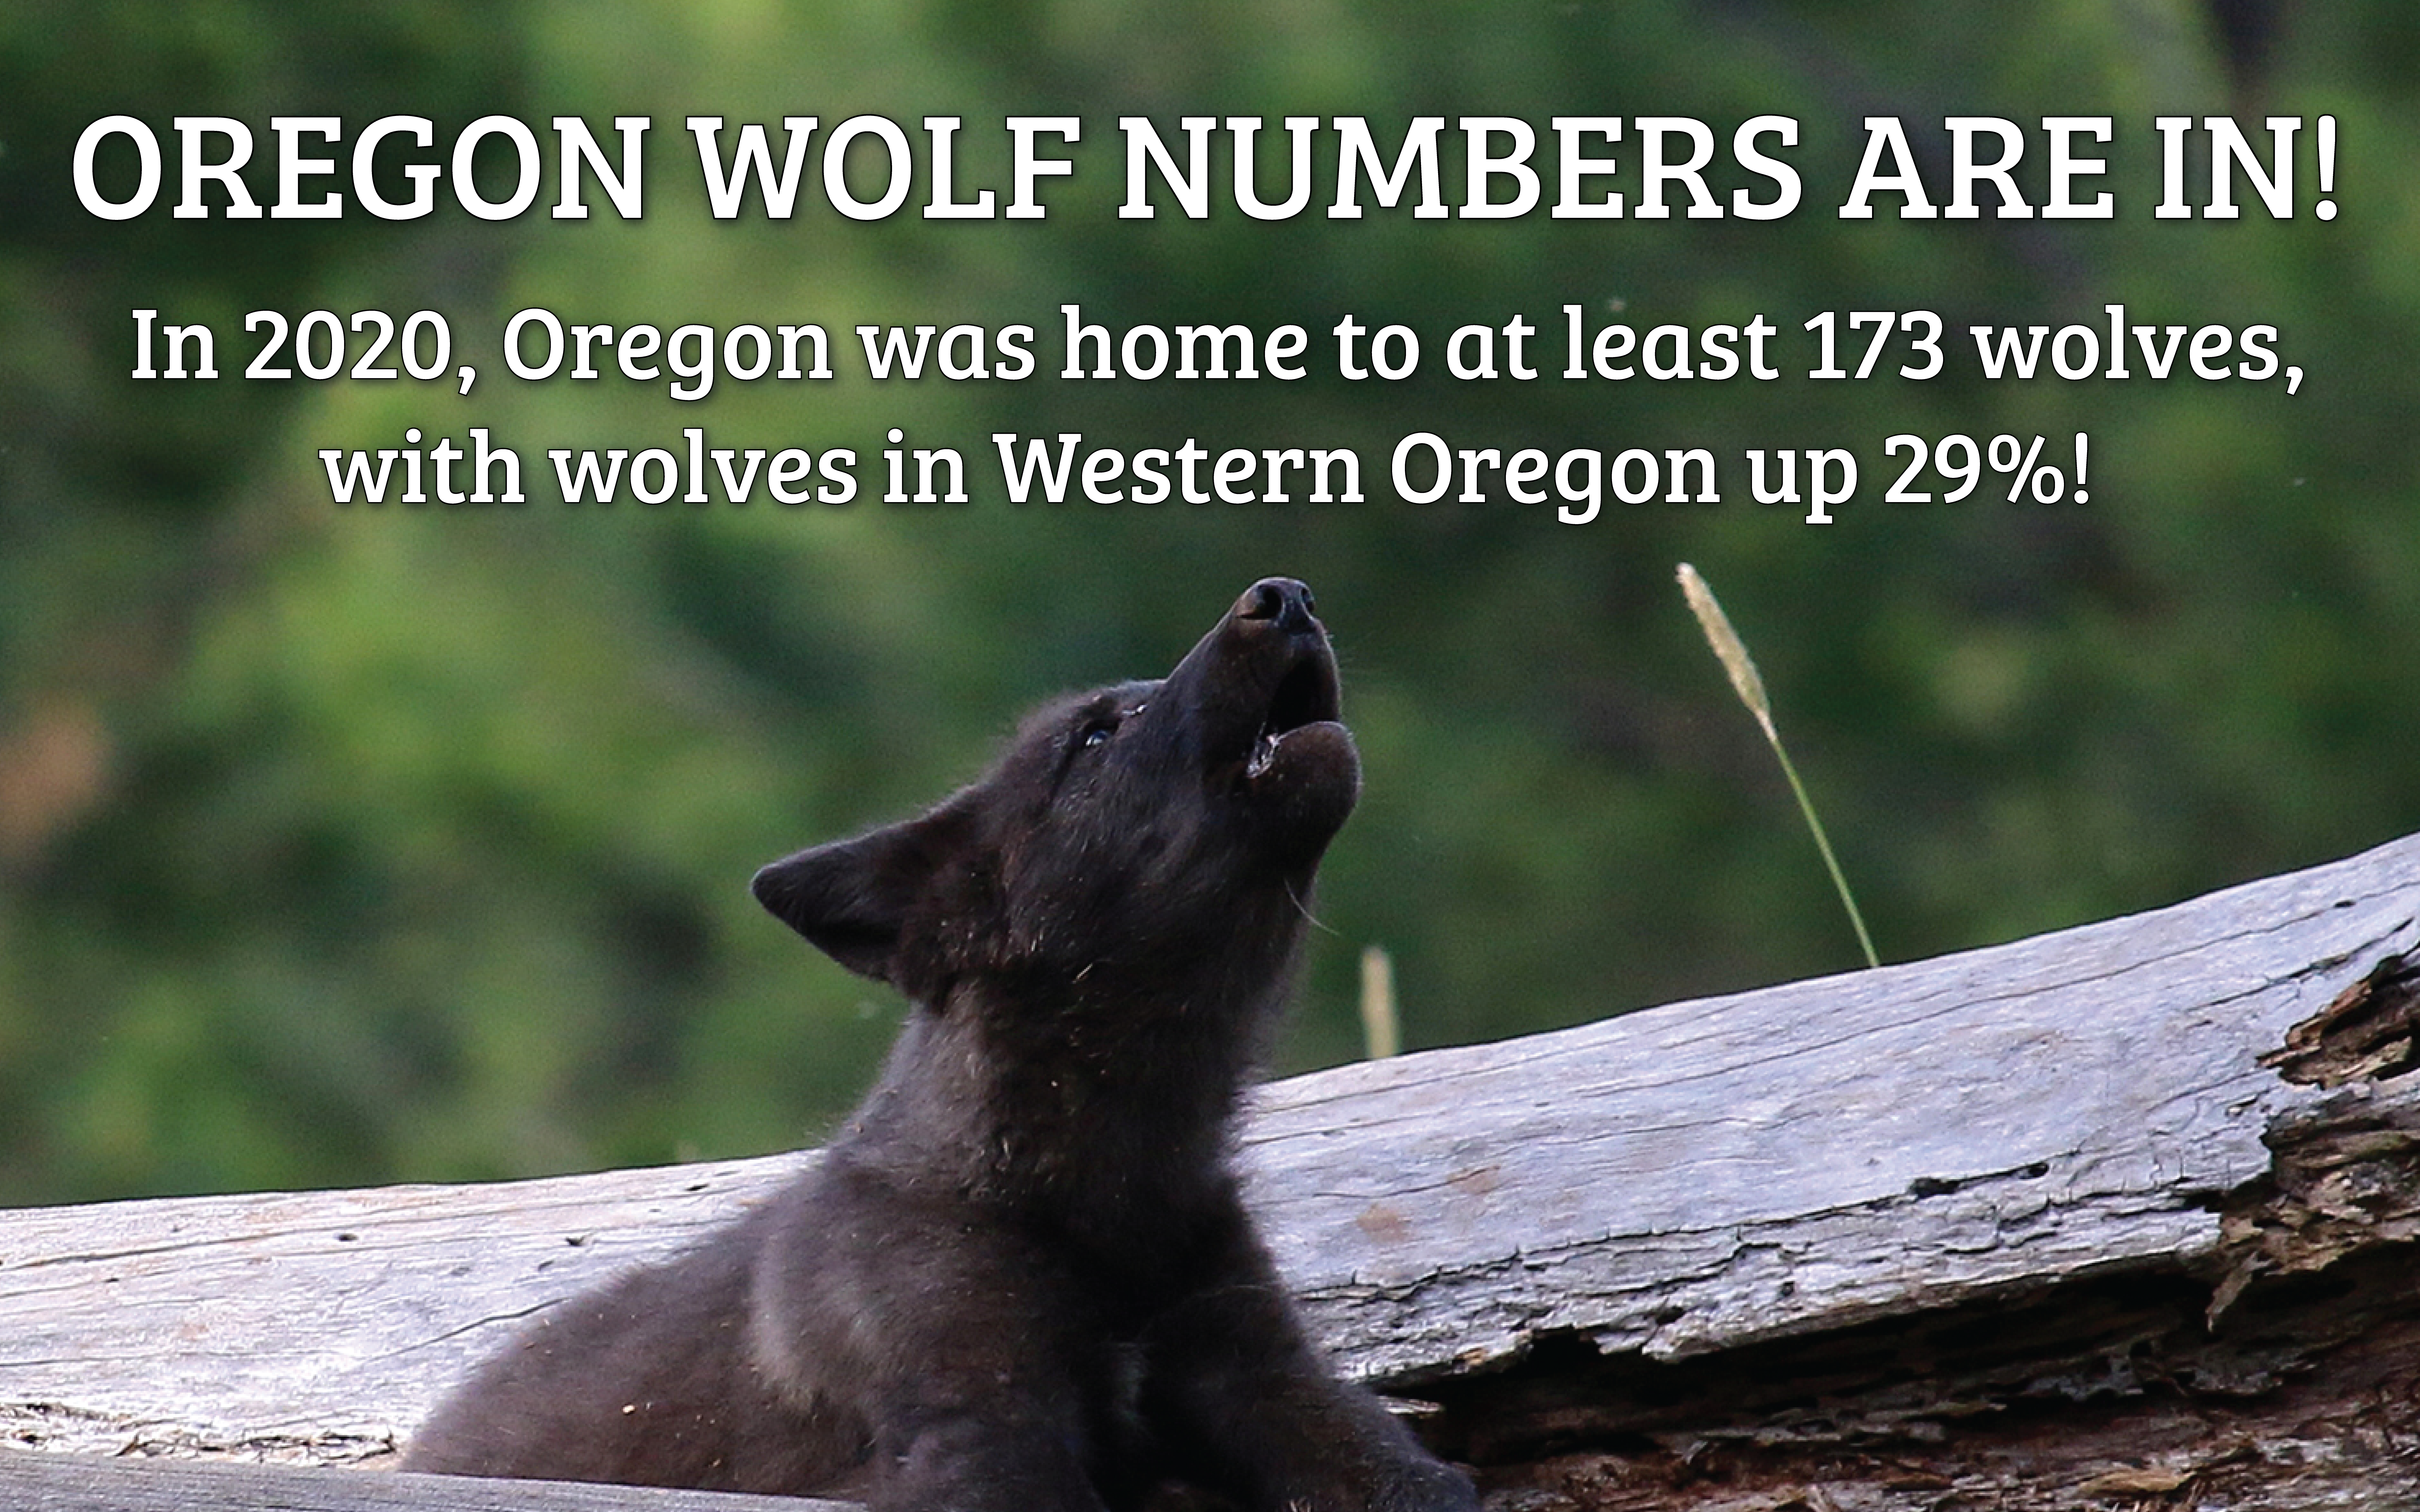 2020 Oregon Wolf Numbers Are In!